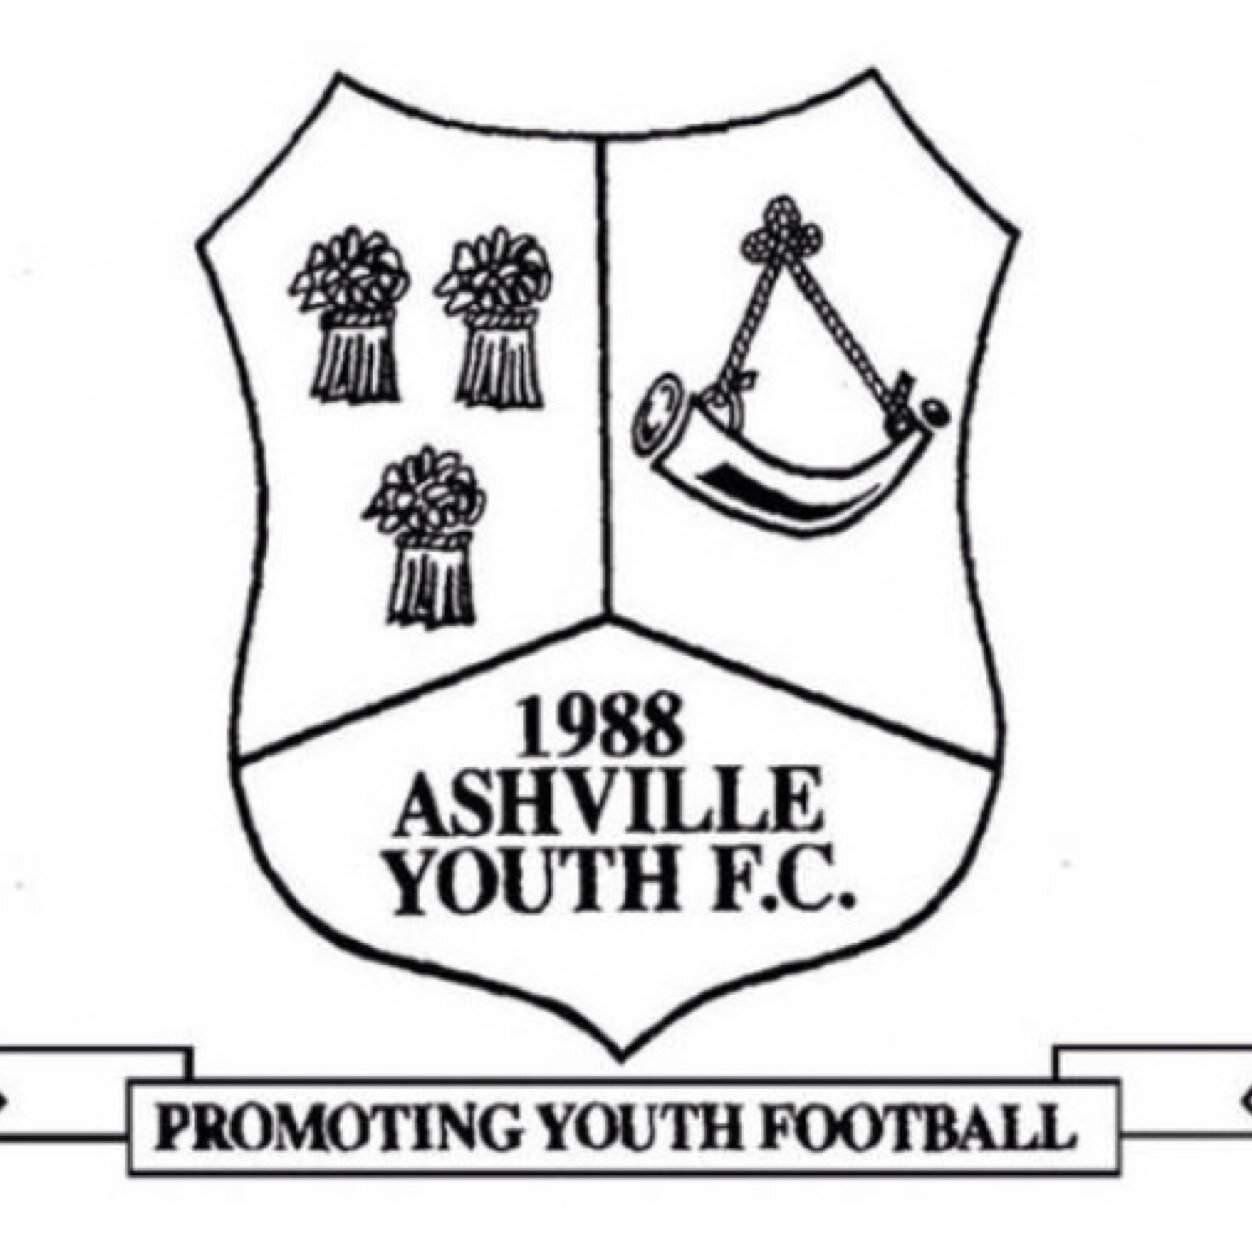 Ashville Youth is a FA Charter Standard Development club based in Wallasey, Merseyside. Players of all abilities welcome to join. Senior set up @AshvilleFC